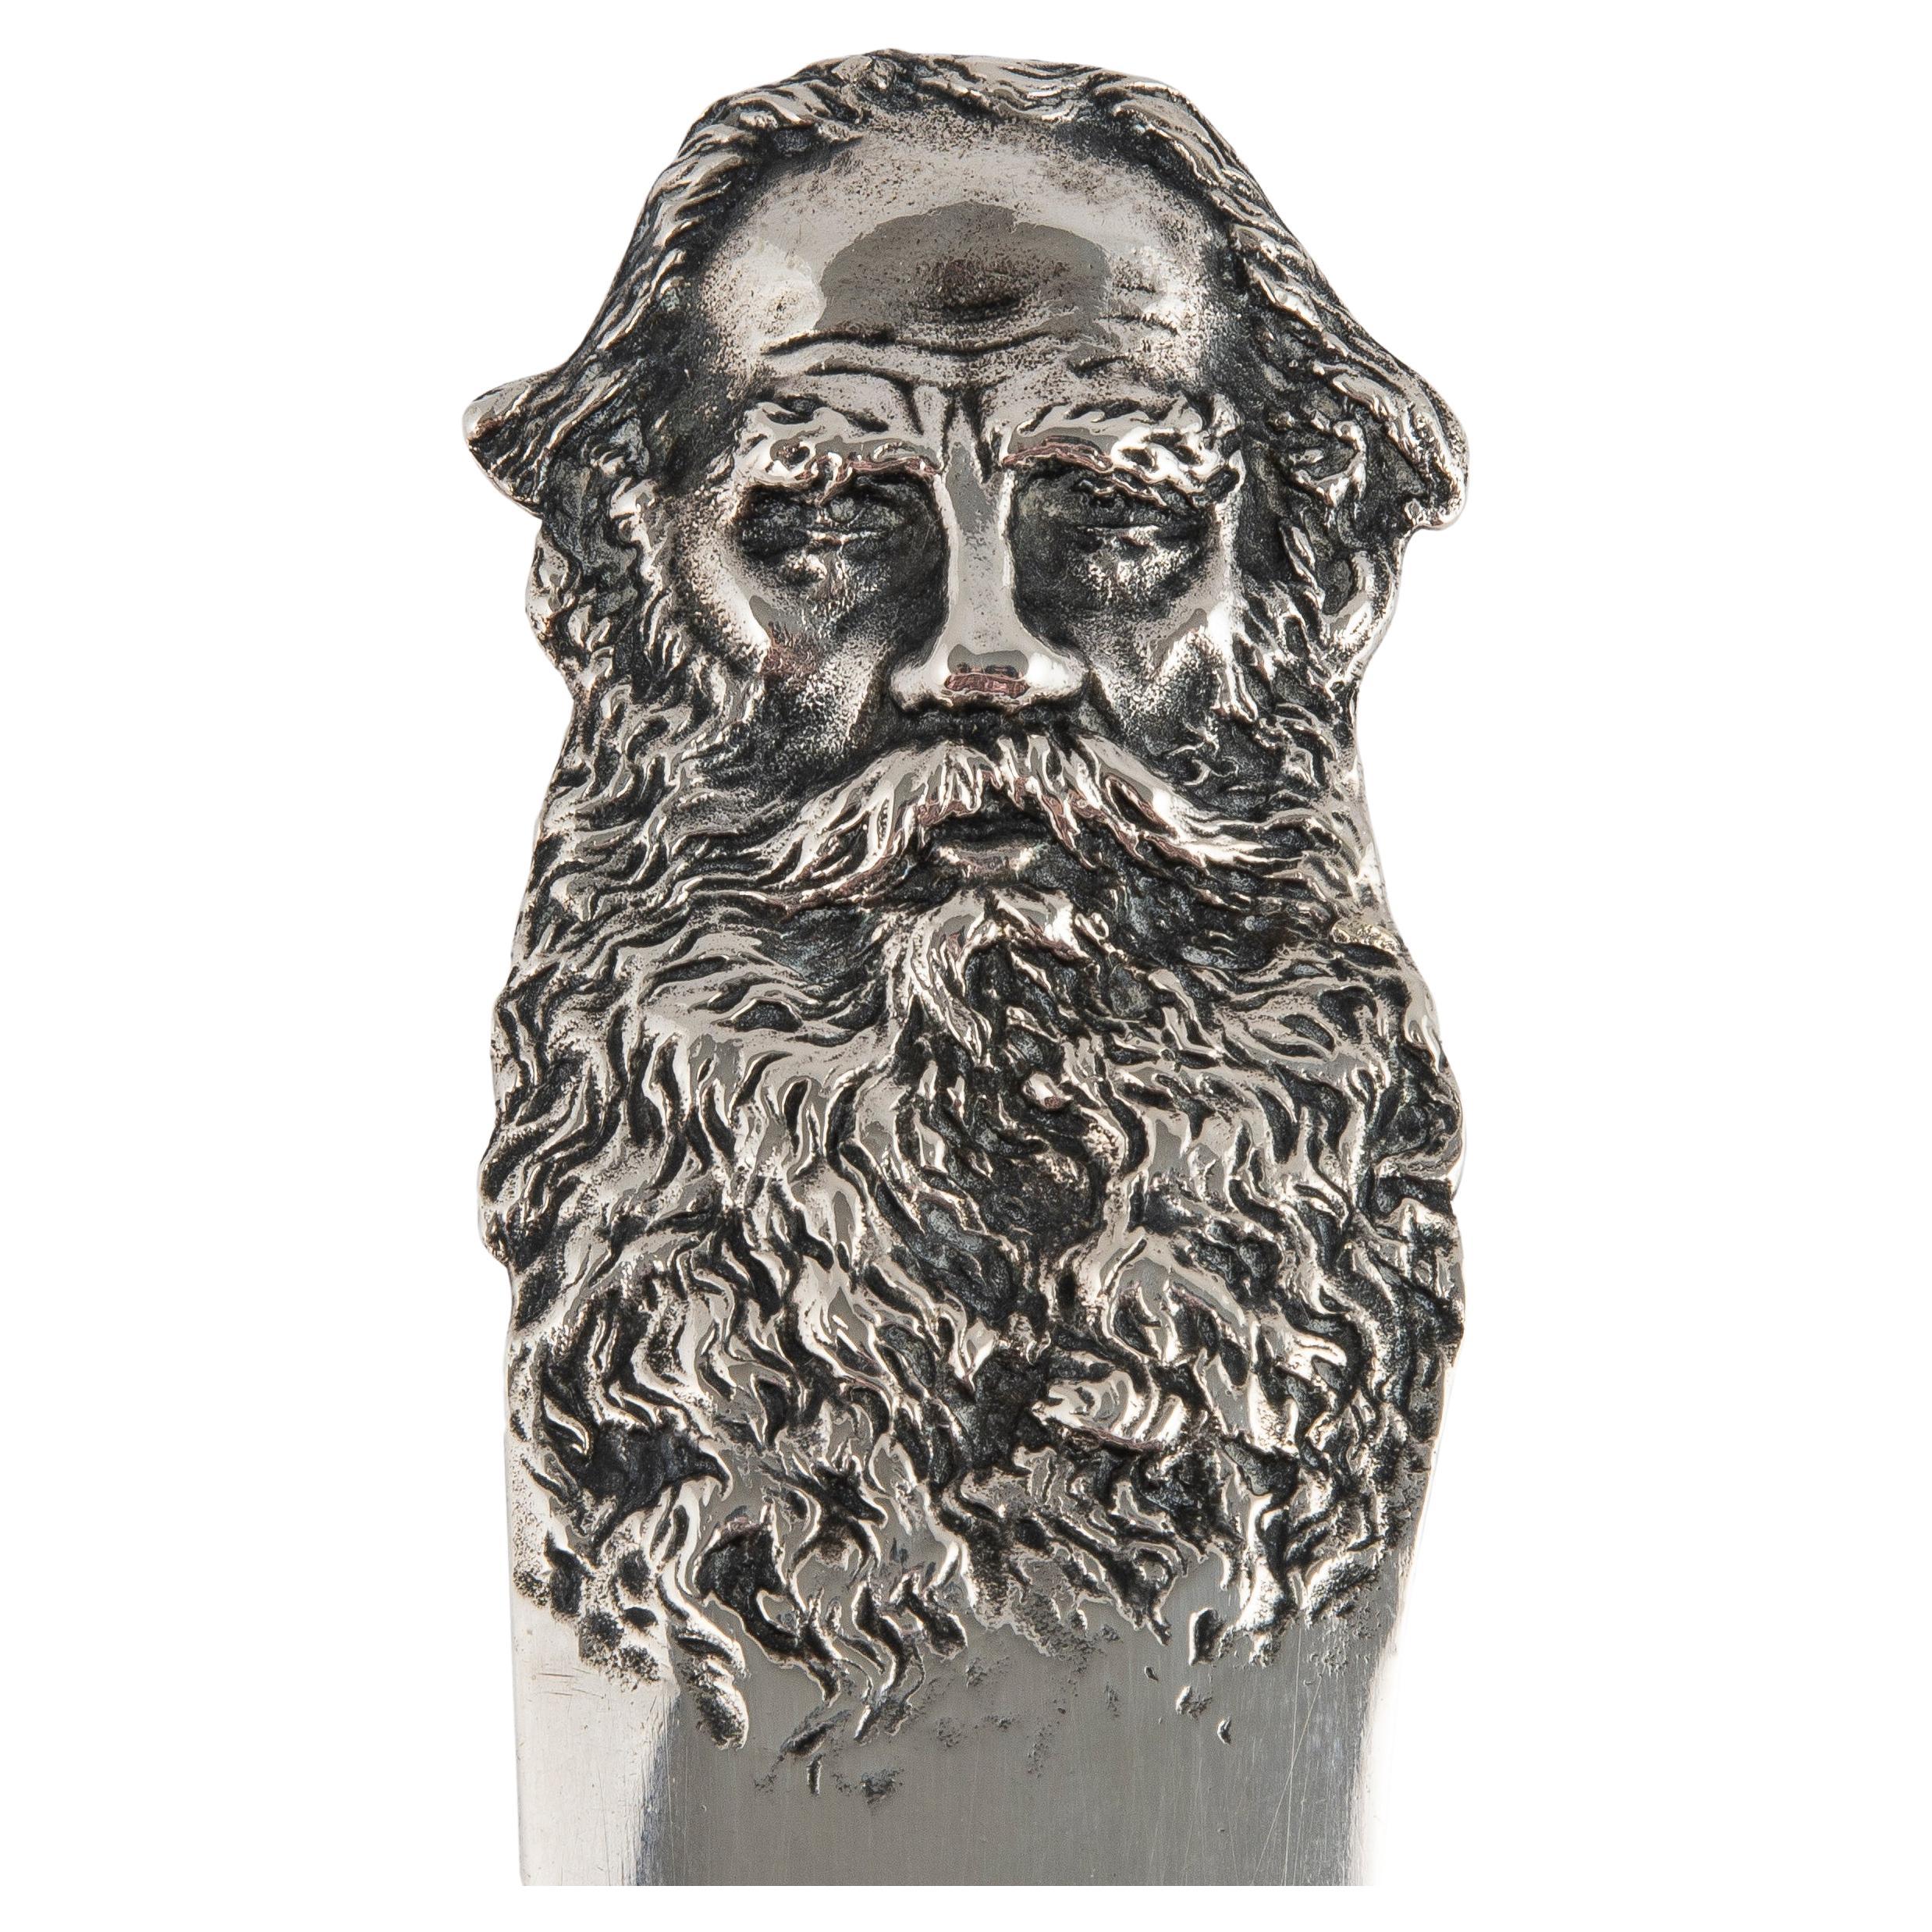  Russian Imperial-era Silver Tolstoy Novelty Paper Knife by Khlebnikov, 1910